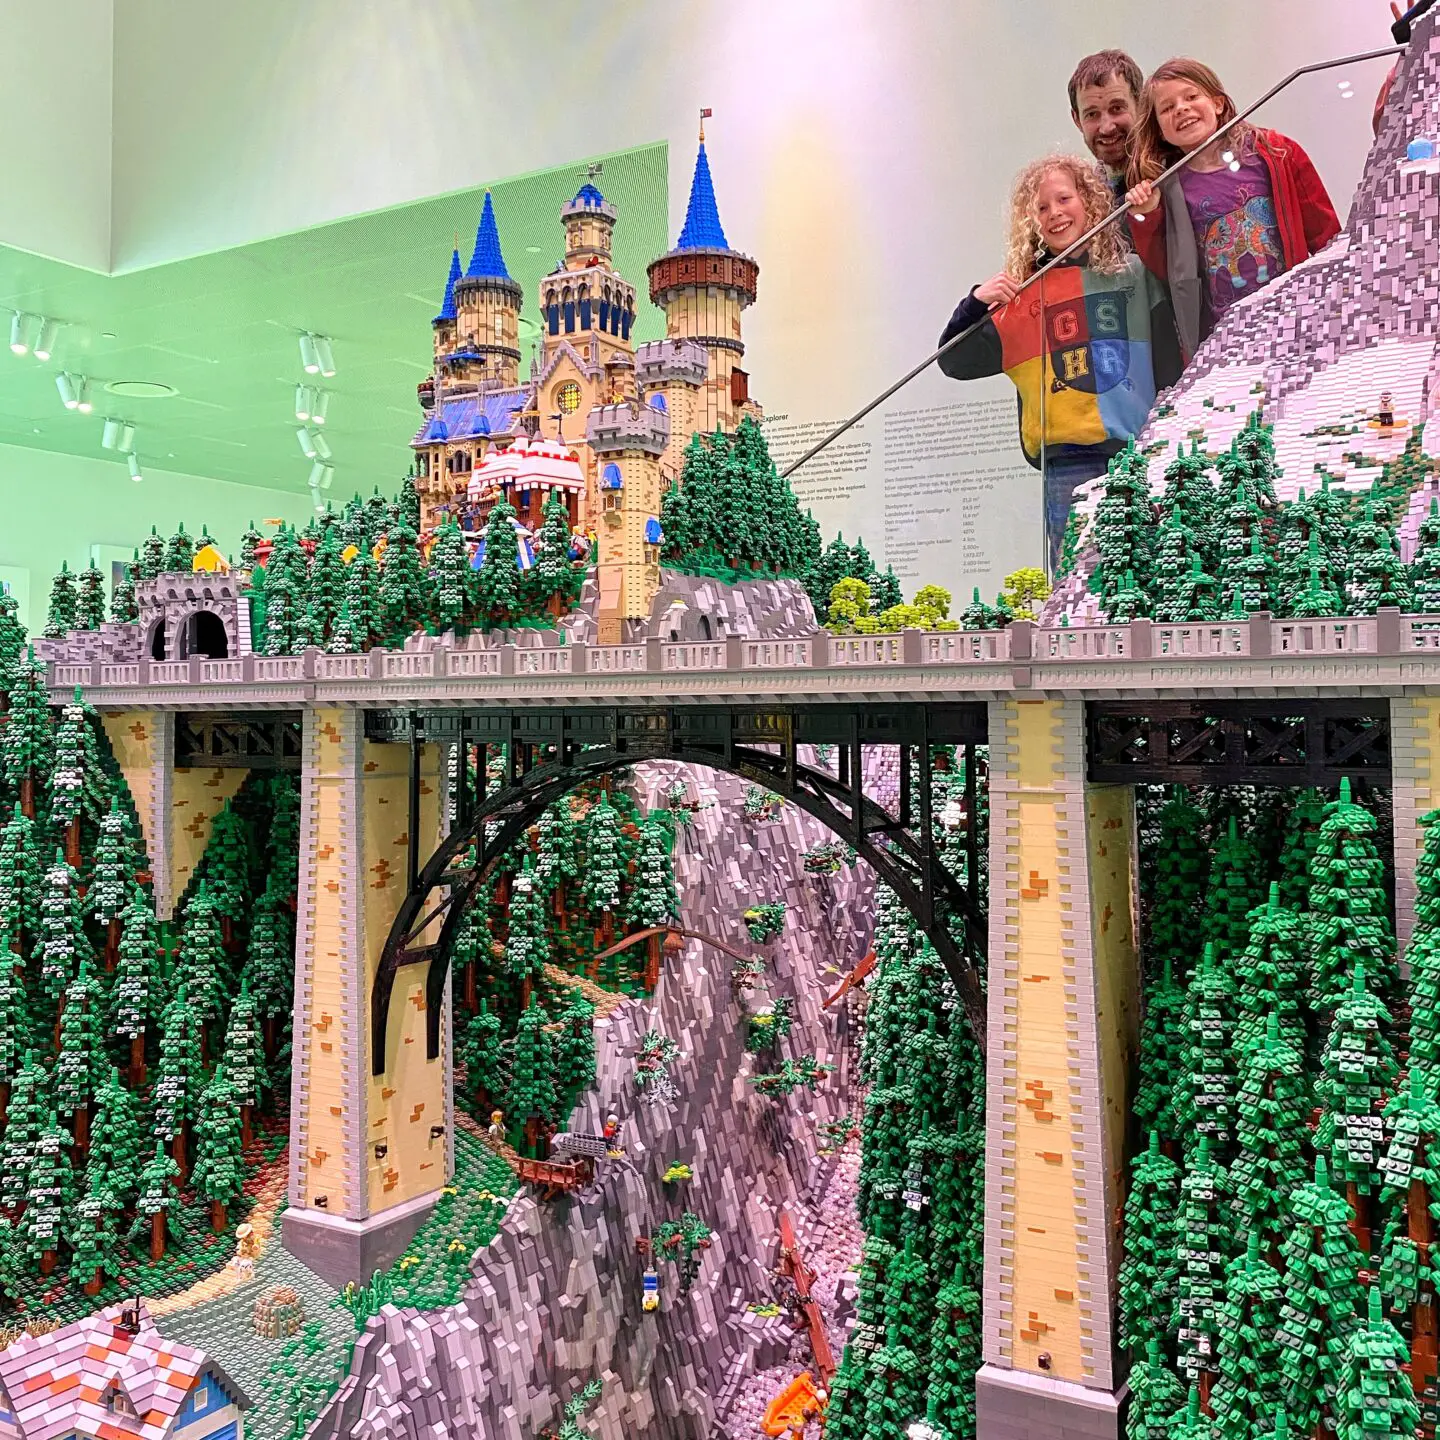 Lego landscape and family at Lego House